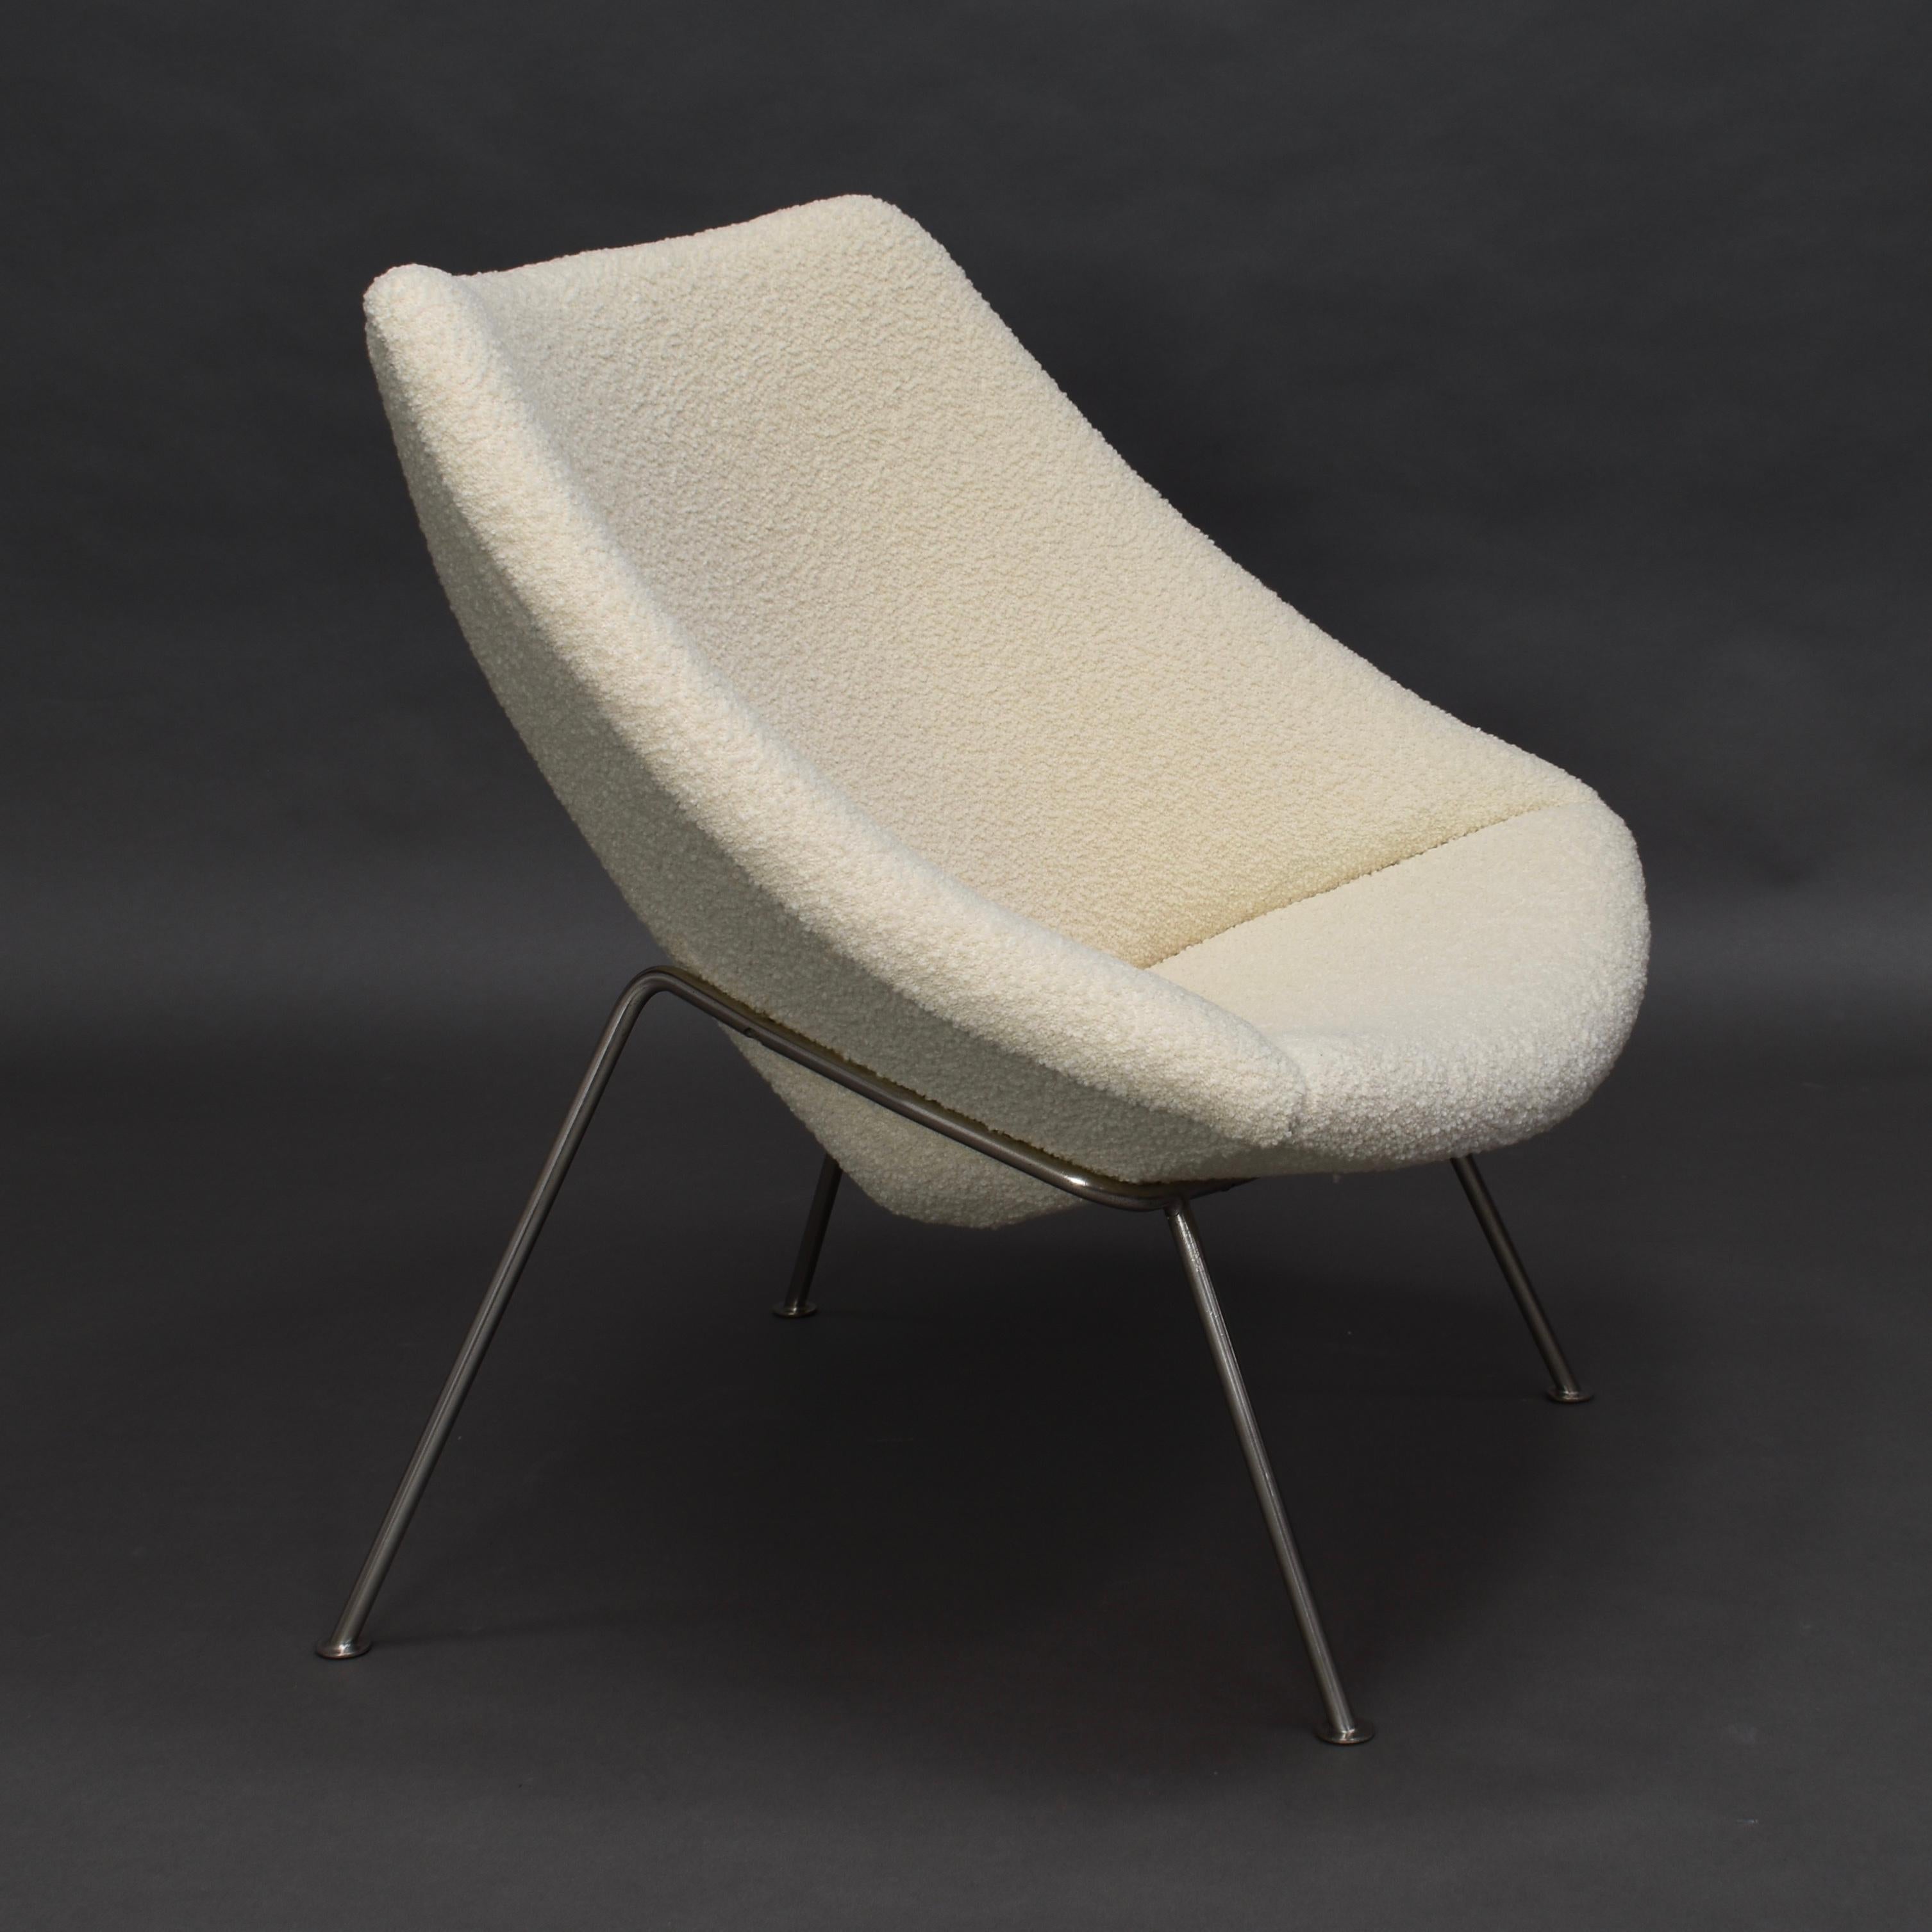 Early 1st edition production ‘Oyster’ F157 lounge chair by Pierre Paulin for Artifort – 1965.

The early metal bases were made of brushed stainless steel. The new modern ones are made of chromed metal.

The chair has been reupholstered in a